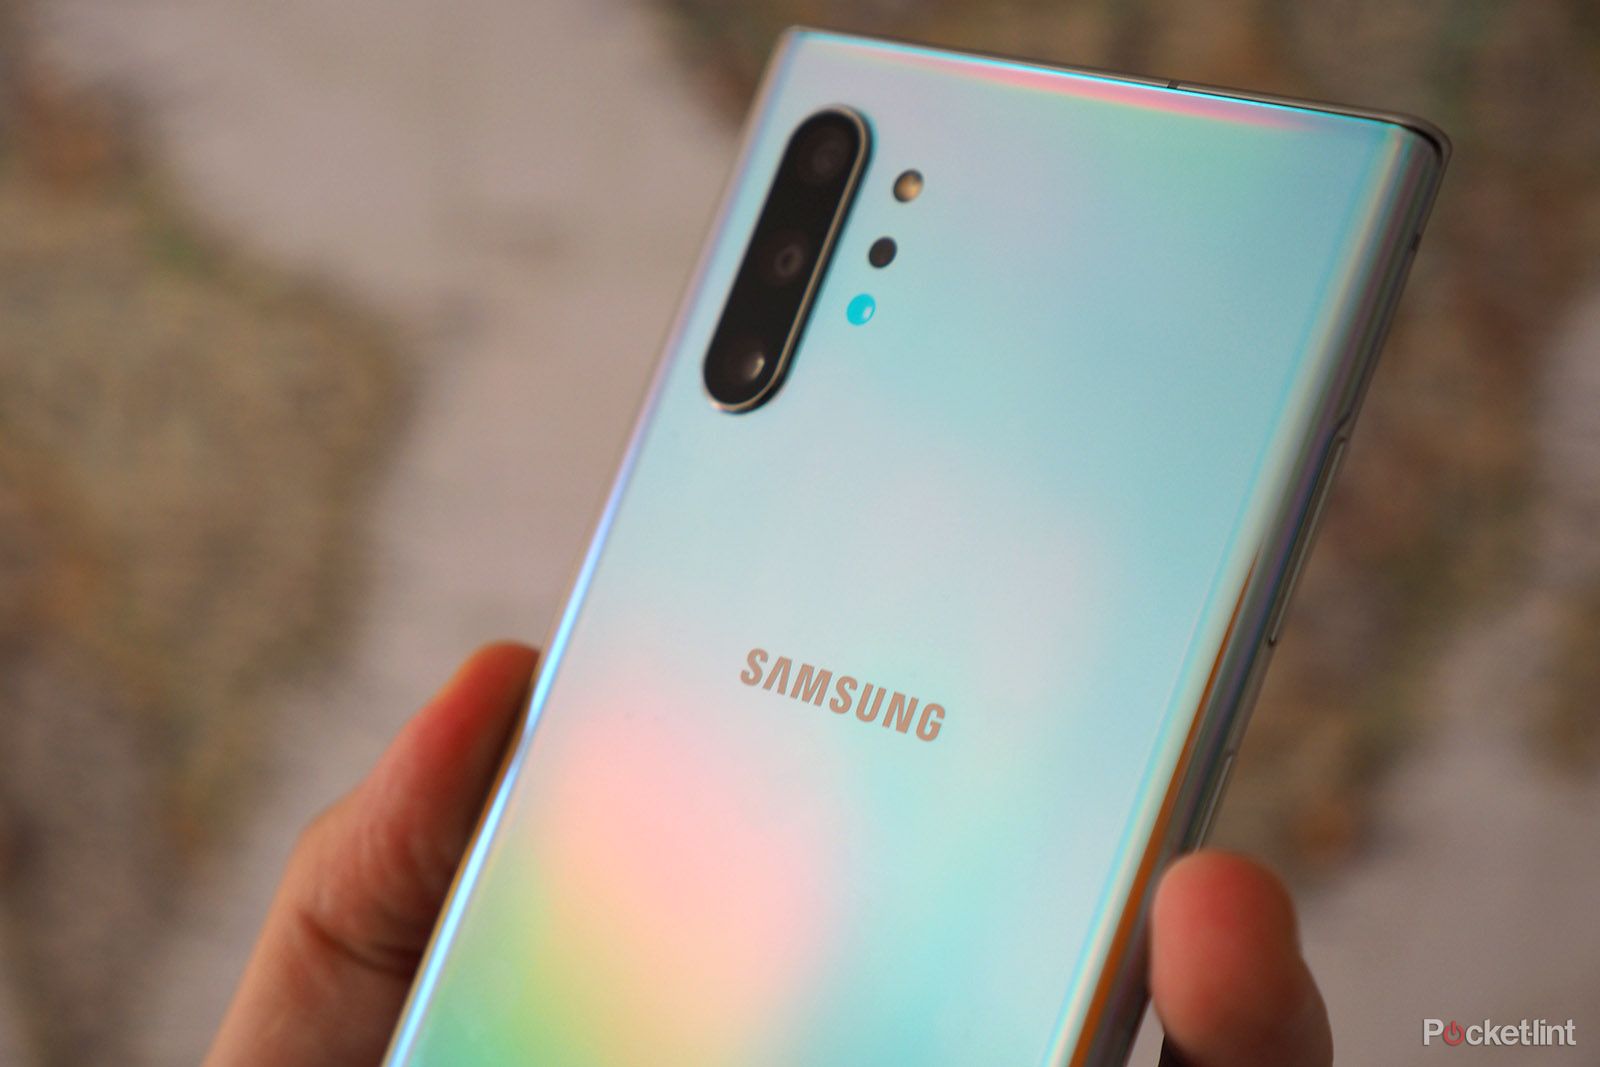 Samsung Galaxy Note 10 Plus review lead image 7